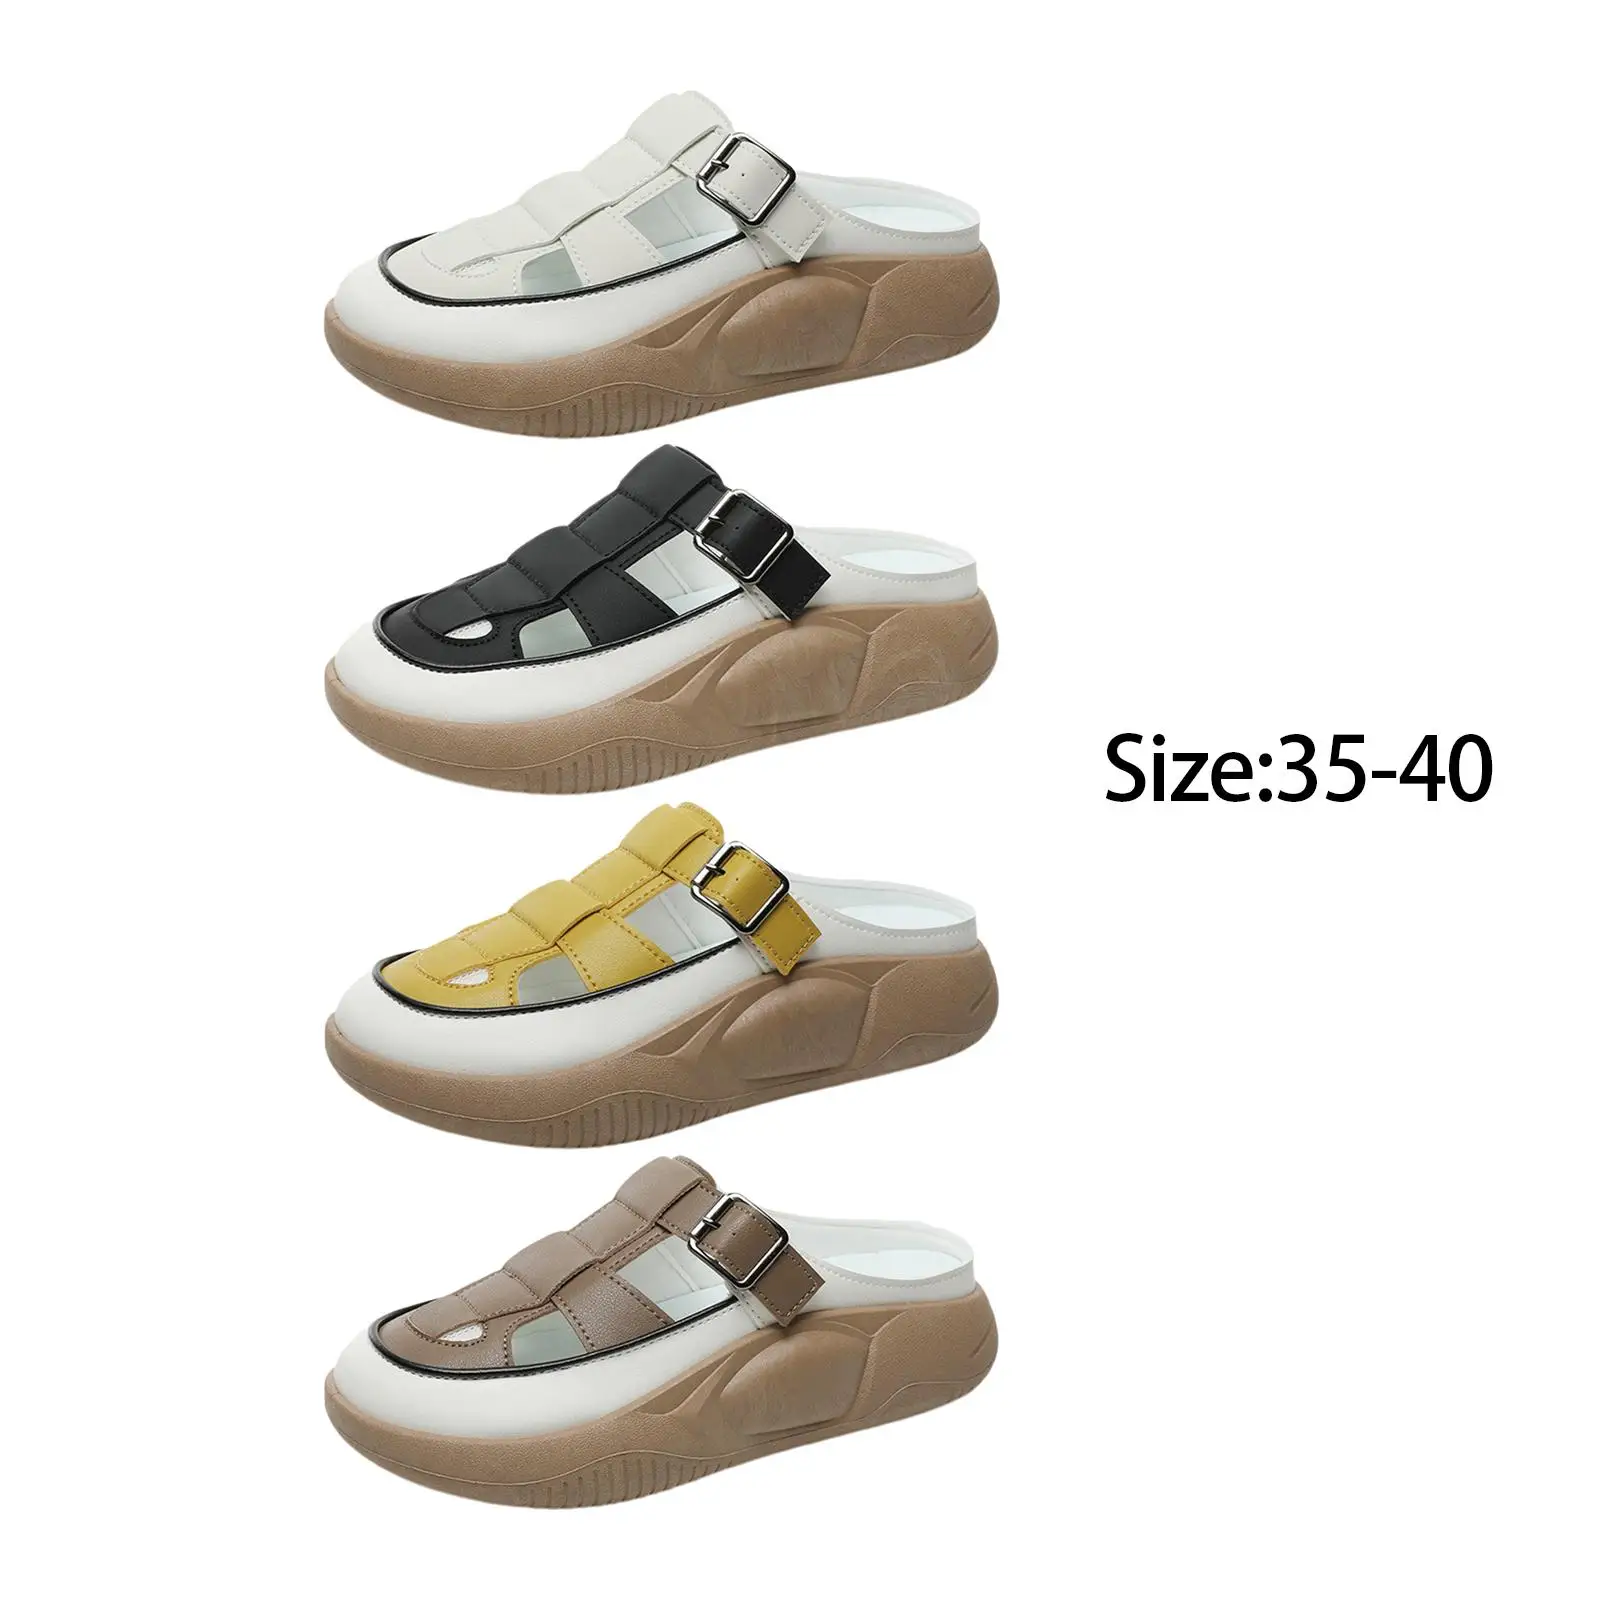 

Slippers Fashion Soft with Buckle Flatform Shoes Rubber Sole andals Strappy Sandal for Bathing Pool Female Streets Casual